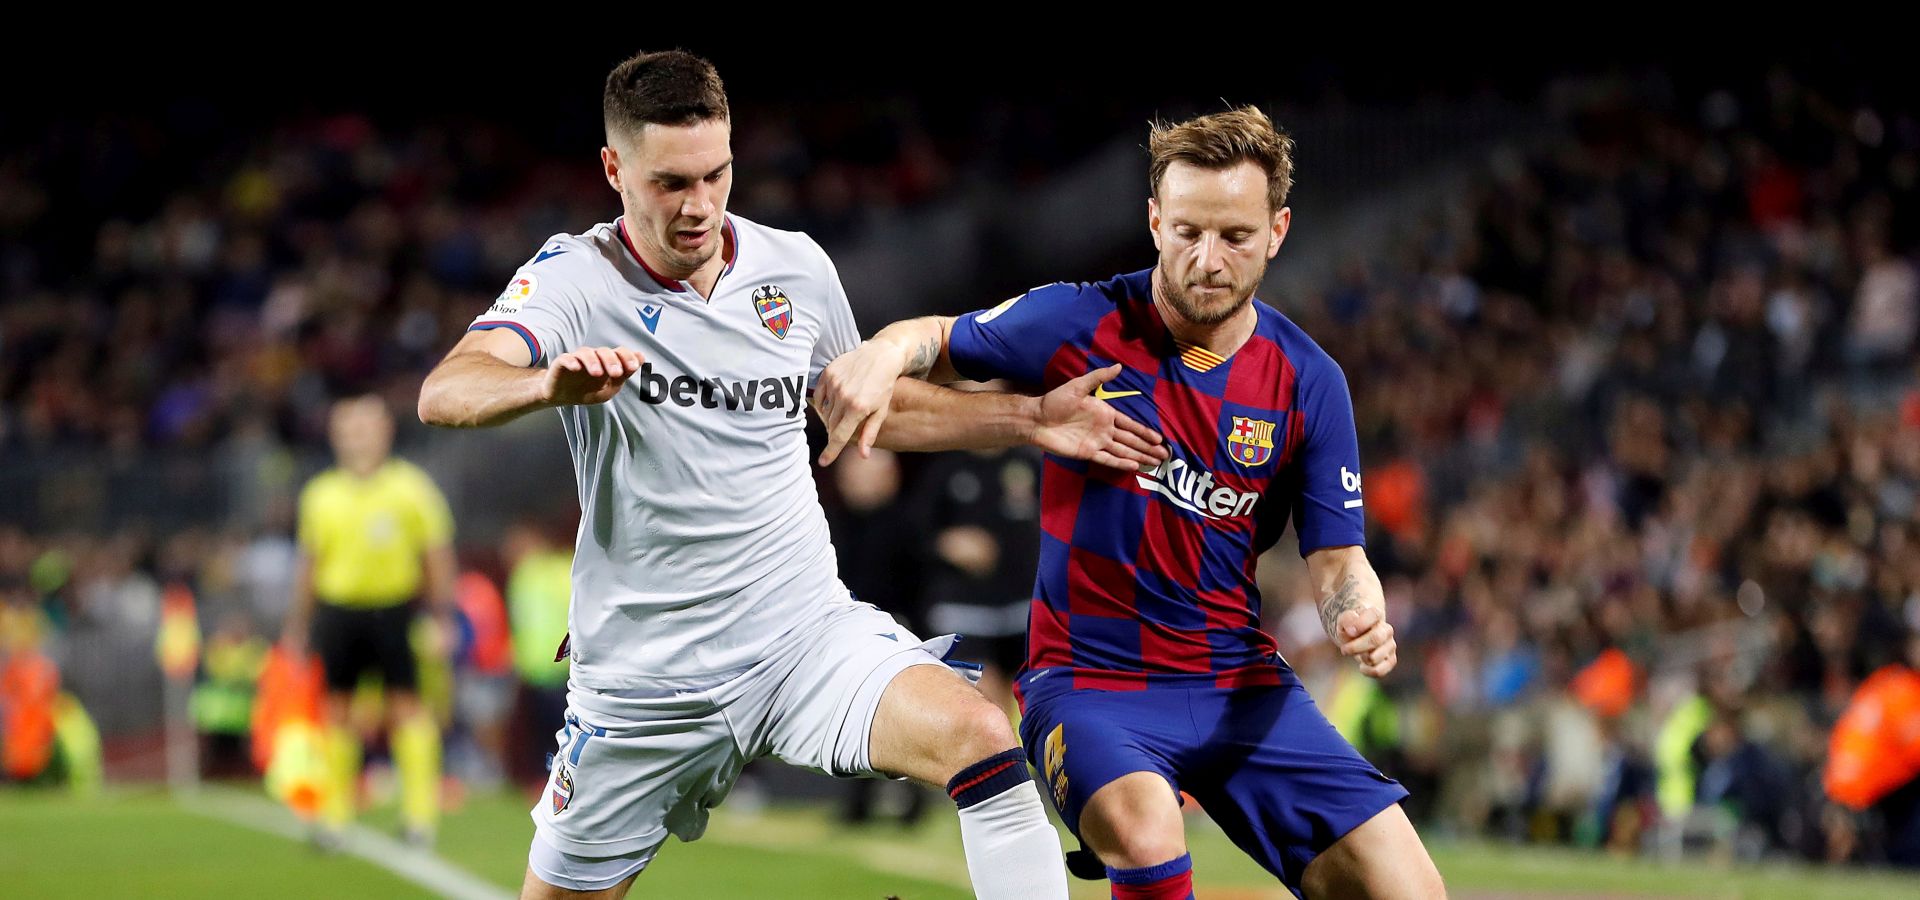 epa08189107 FC Barcelona's Ivan Rakitic (R) duels for the ball with UD Levante's Nikola Vukcevic during the Spanish LaLiga soccer match between FC Barcelona and UD Levante played at the Camp Nou stadium in Barcelona, Spain, 02 February 2020.  EPA/Alberto Estevez